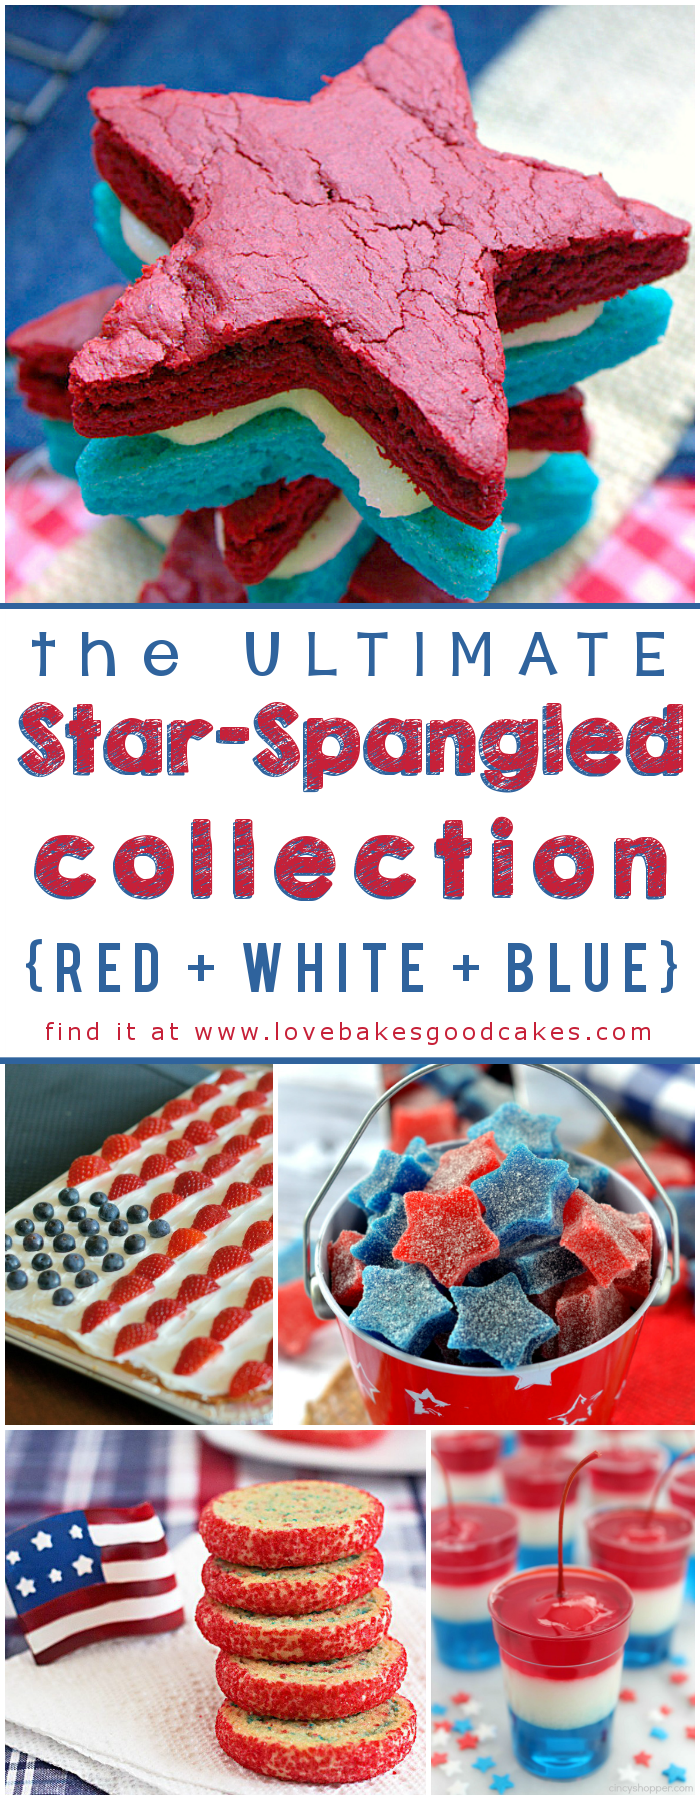 The ULTIMATE Star-Spangled Collection! (Red White Blue) - Find inspiration for the 4th of July, Memorial Day, Flag Day or any time you want add a patriotic flair!